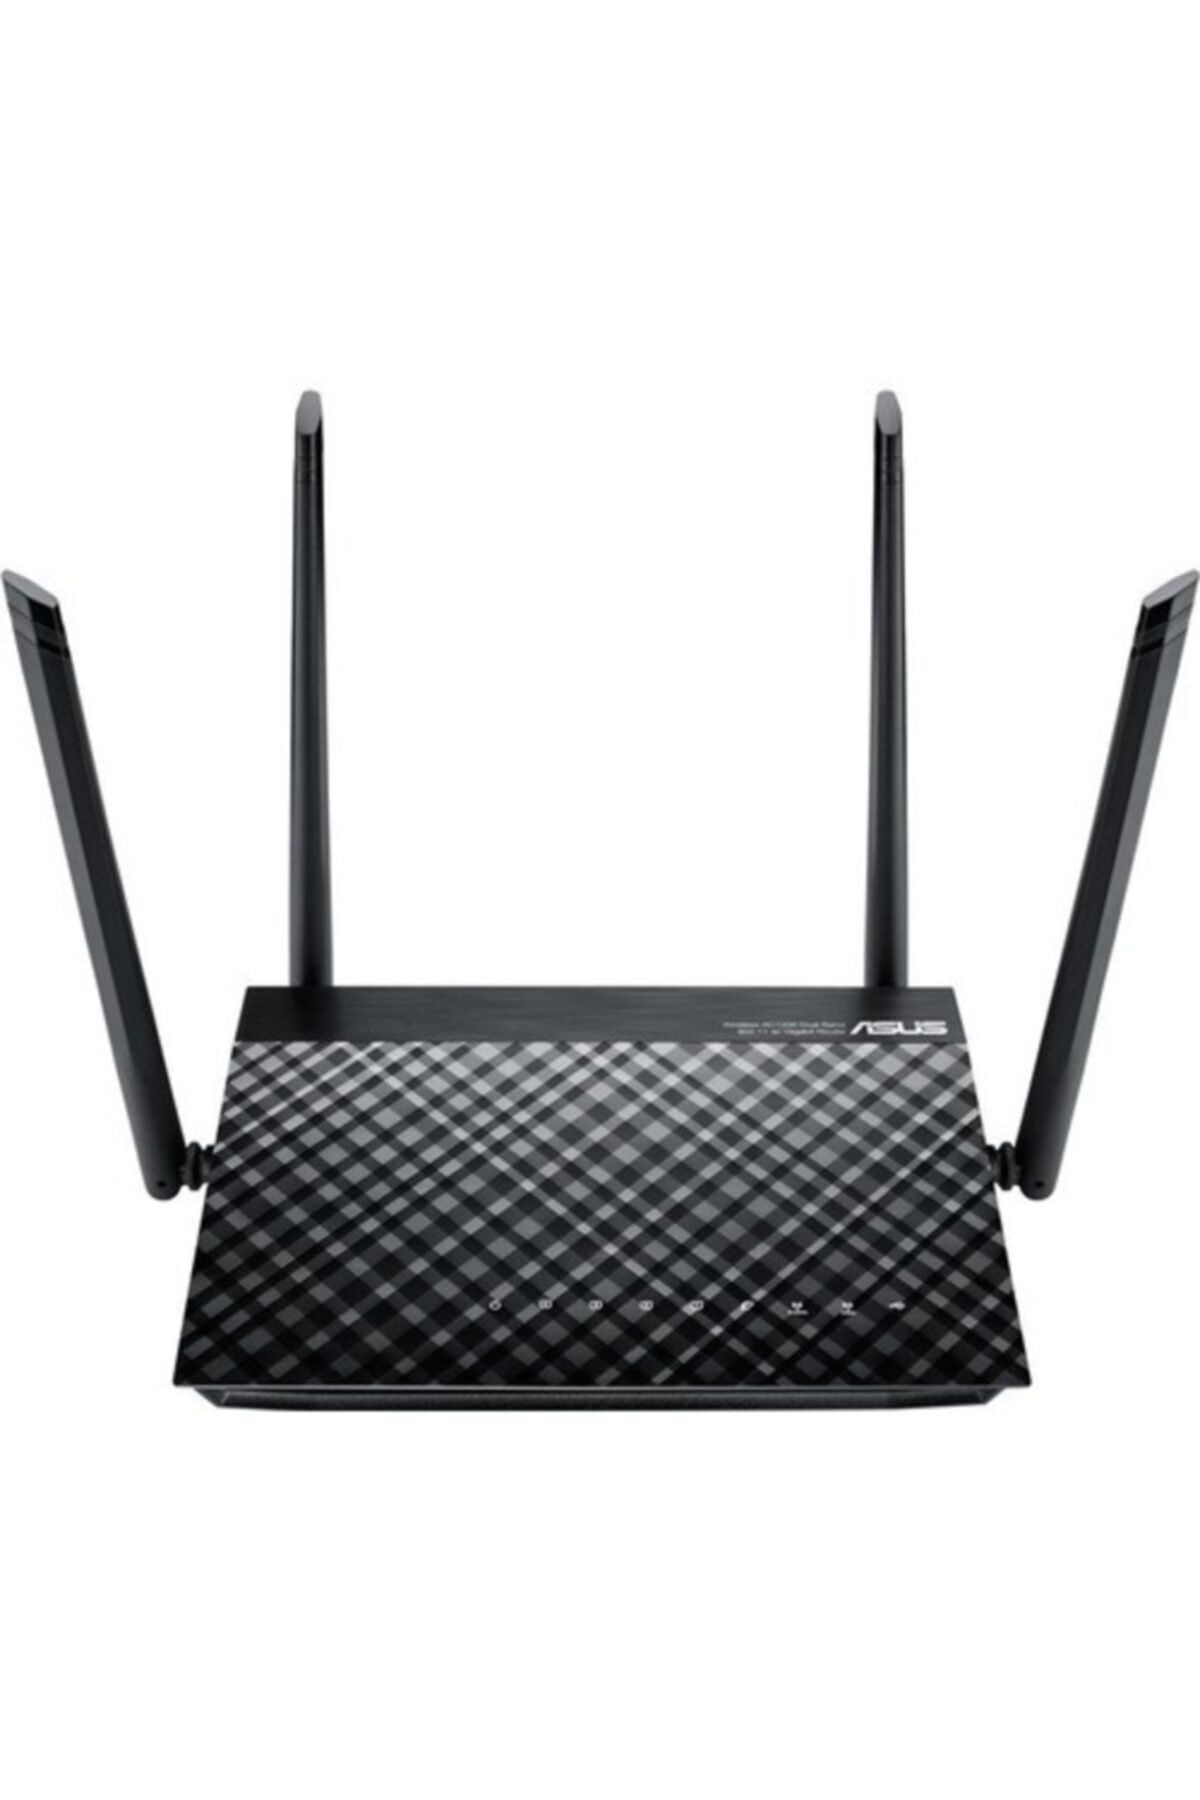 ASUS Rt-ac1200 1200mbps Ac1200 Dual Band Ev Ofis Tipi Router 4x 5dbi Harici Anten